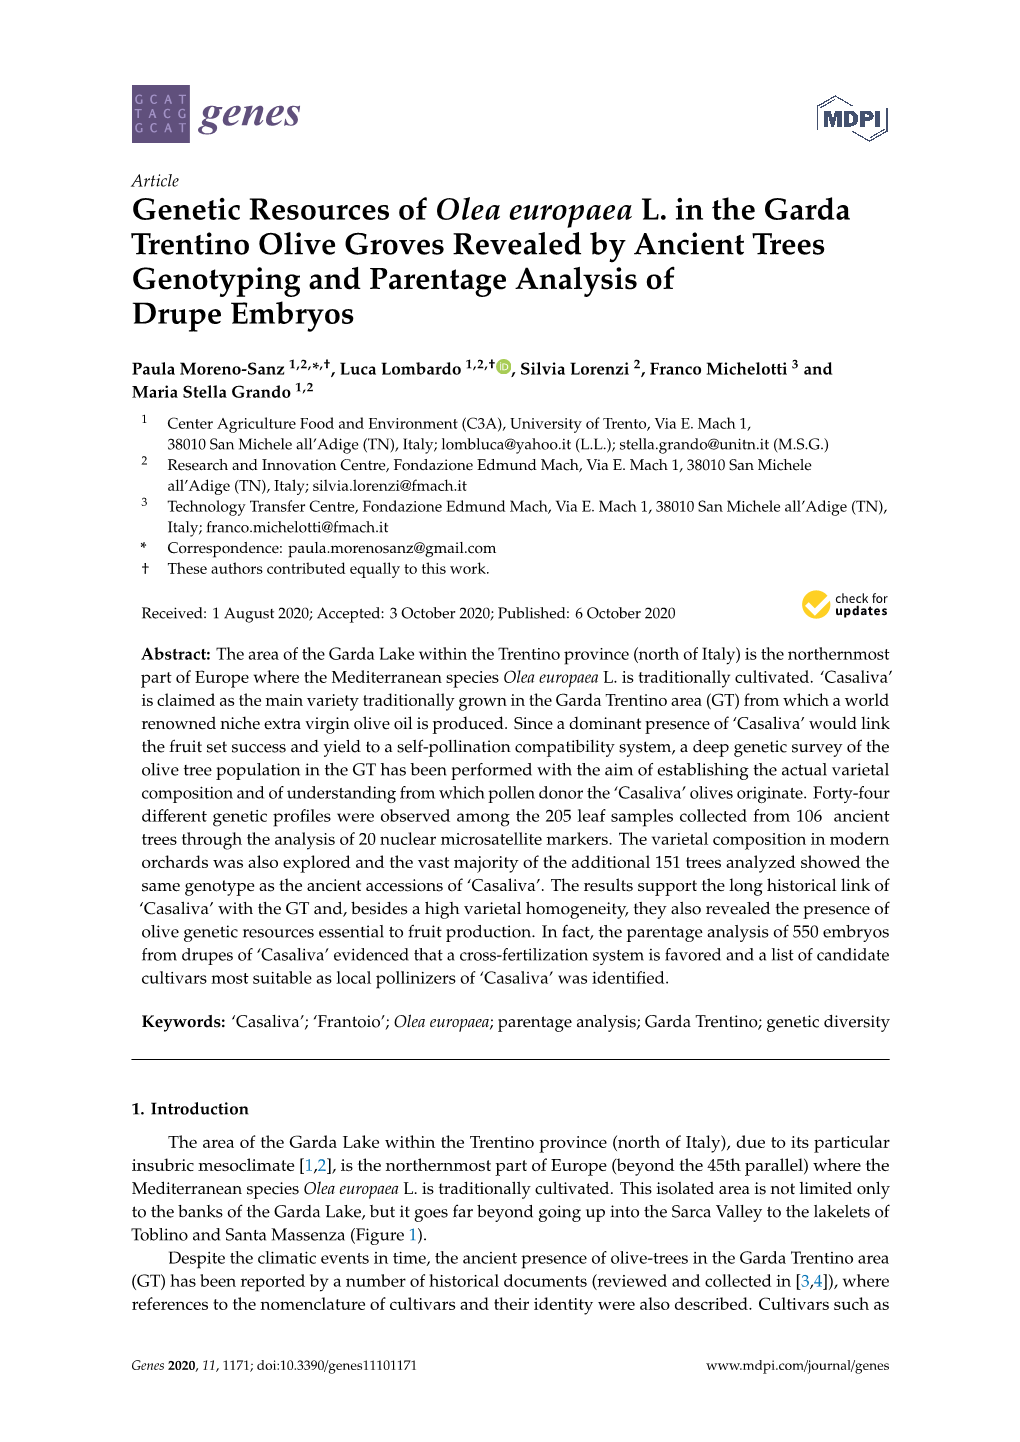 Genetic Resources of Olea Europaea L. in the Garda Trentino Olive Groves Revealed by Ancient Trees Genotyping and Parentage Analysis of Drupe Embryos